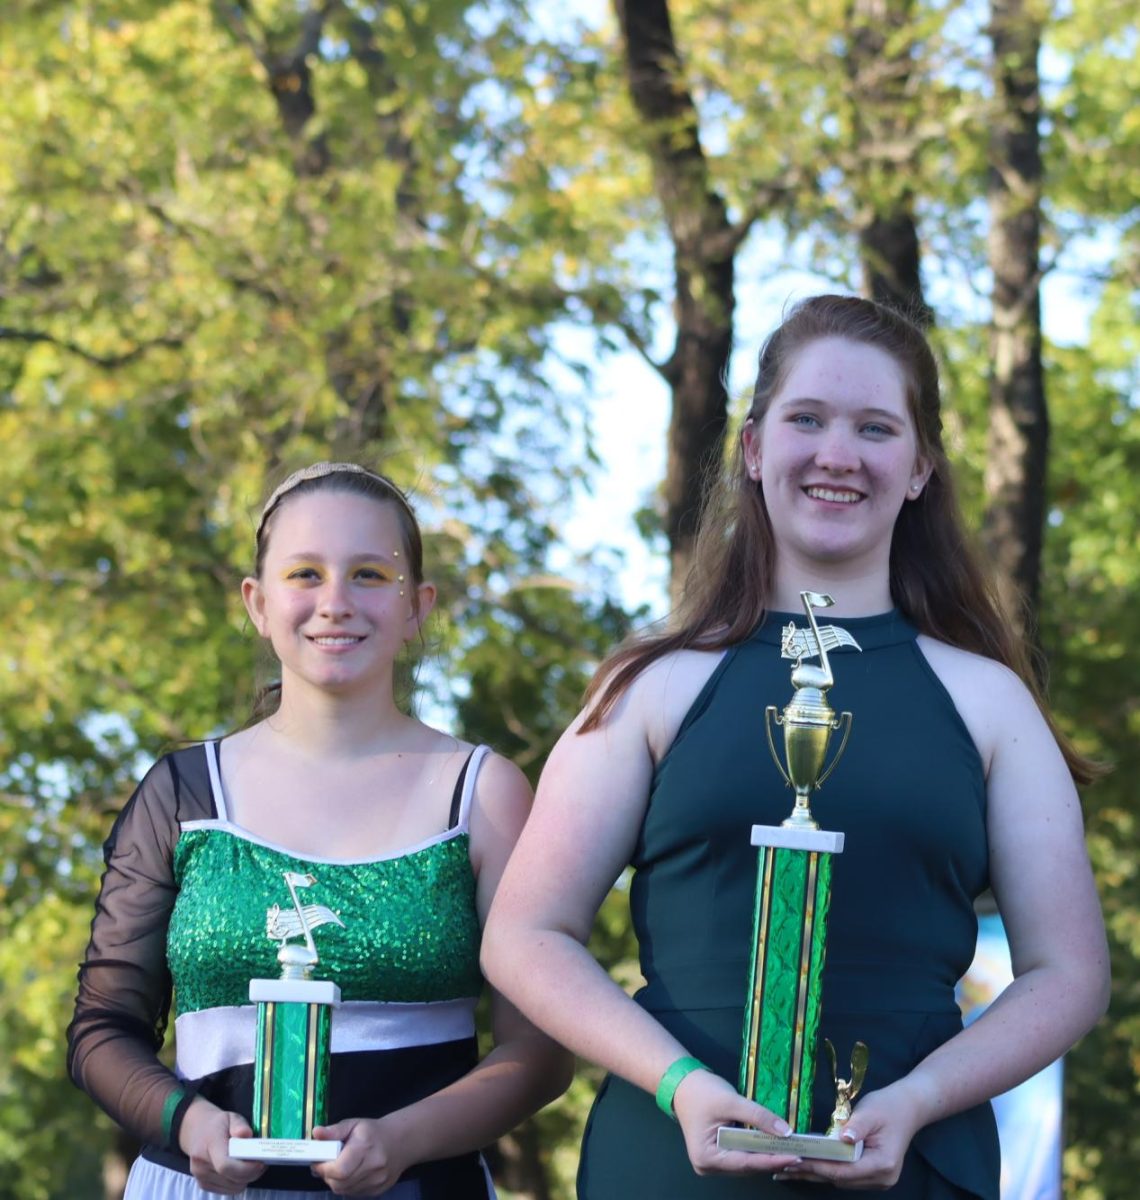 Drum+Major+Alyson+Alcantara+and+Colorguard+captain+Marissa+Ricke+receive+trophies+at+the+marching+band+competition.+The+band+received+second+place+for+their+field+show+and+outstanding+percussion.